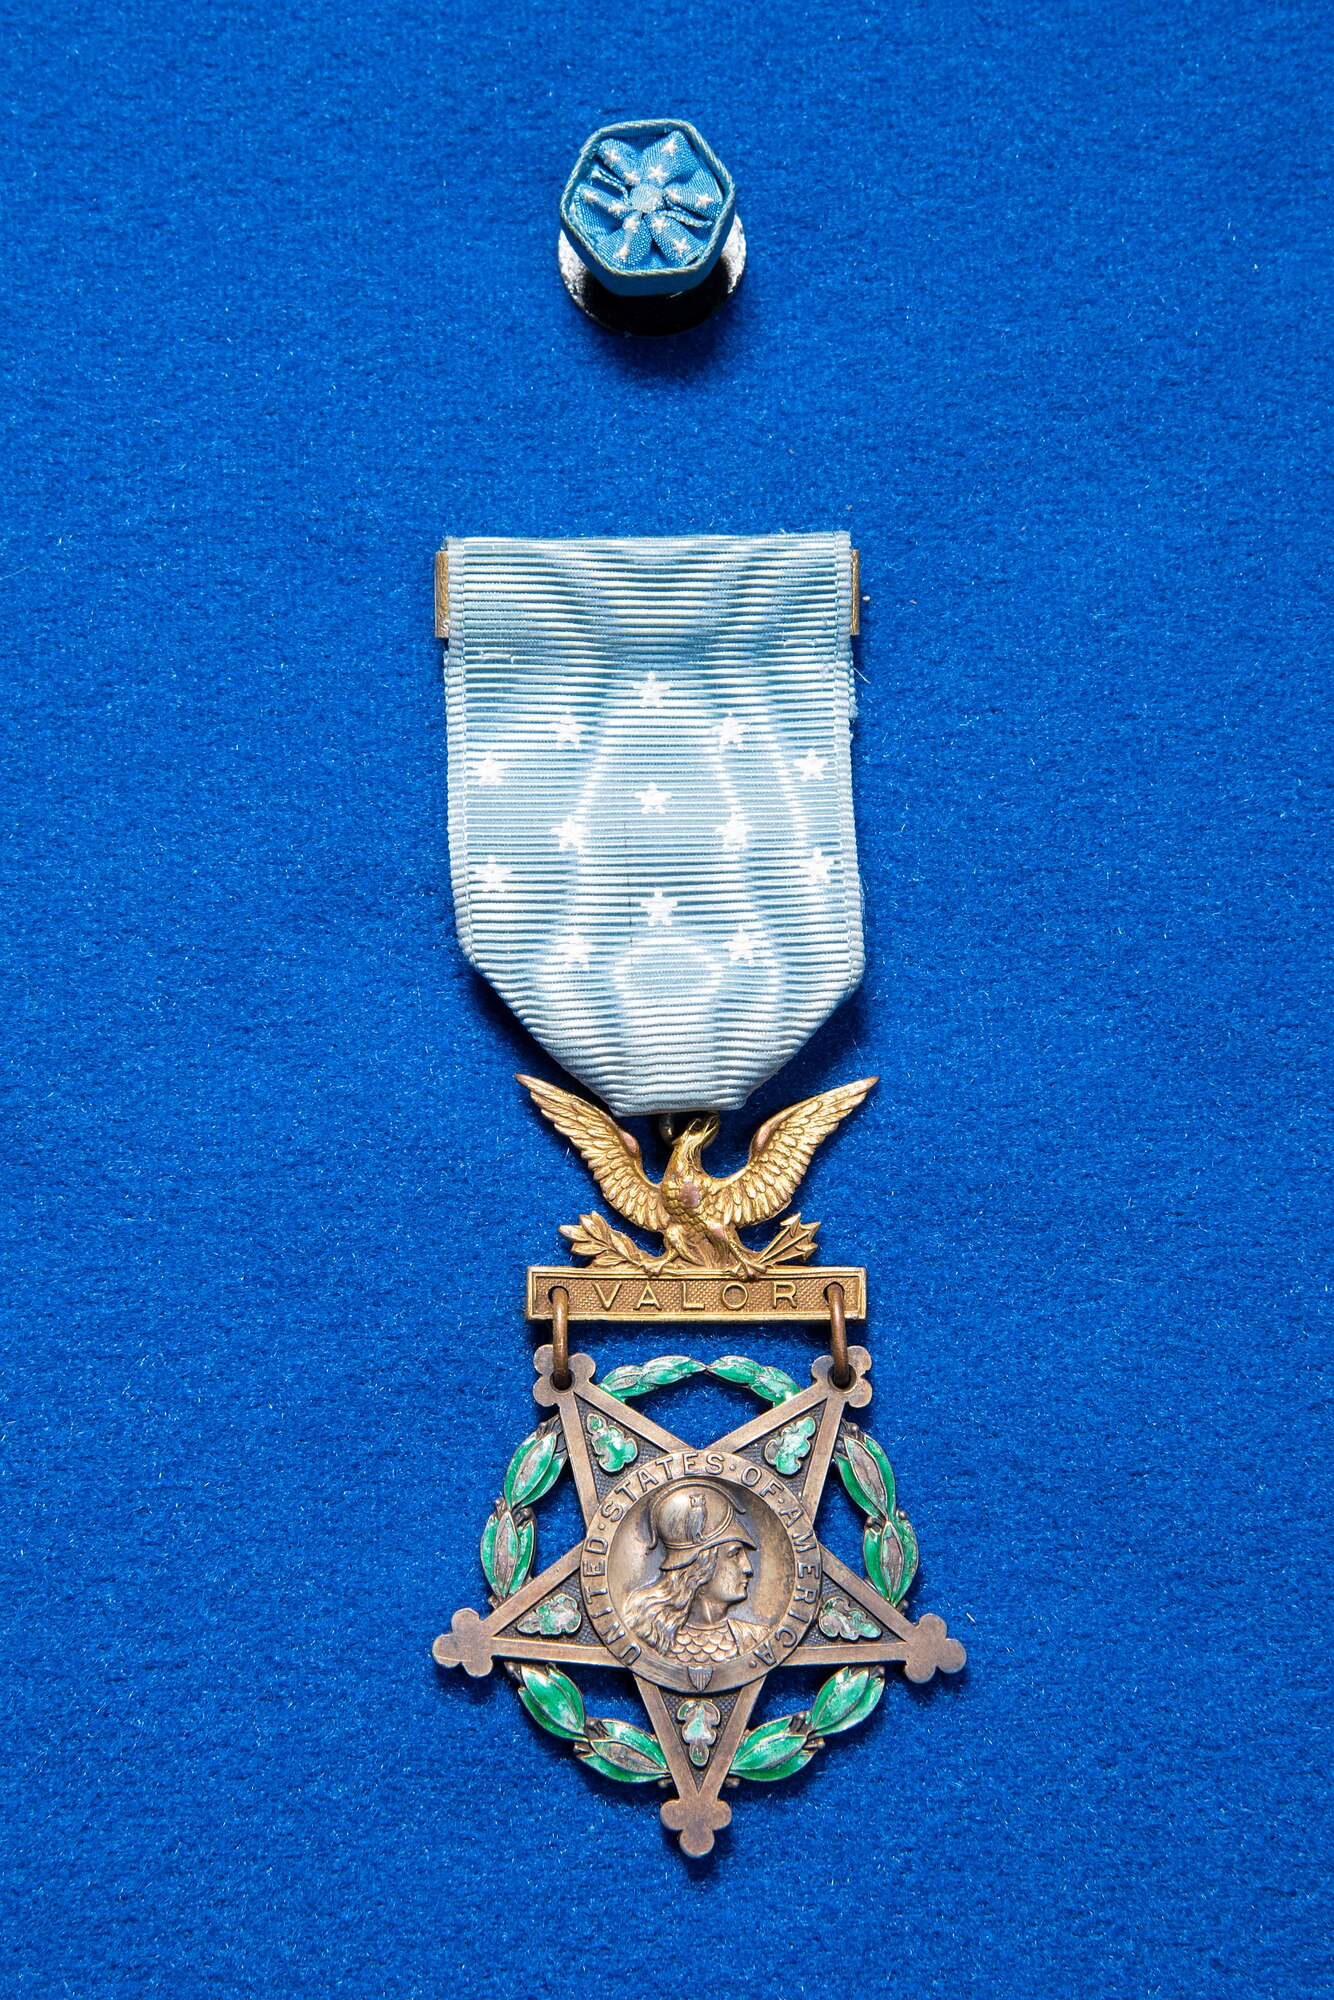 WWI pilot Lt. Harold E. Goettler Medal of Honor on display in the Early Years Gallery at the National Museum of the U.S. Air Force. (U.S. Air Force photo by Ken LaRock)